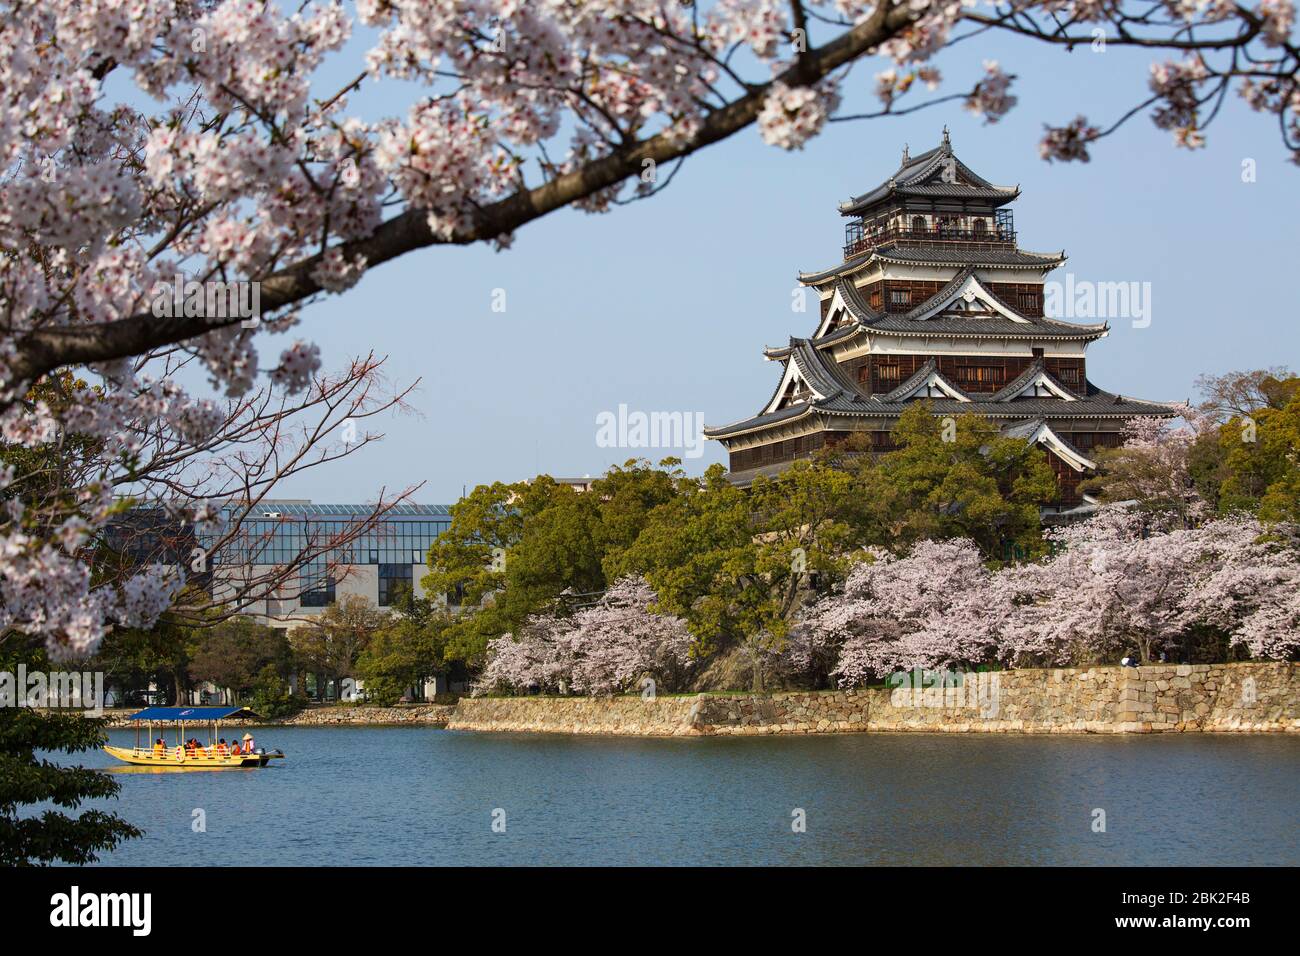 beautiful landscape of Hiroshima Castle with a boat on moat and cherry blossoms in spring, Naka Ward, Hiroshima, Japan Stock Photo